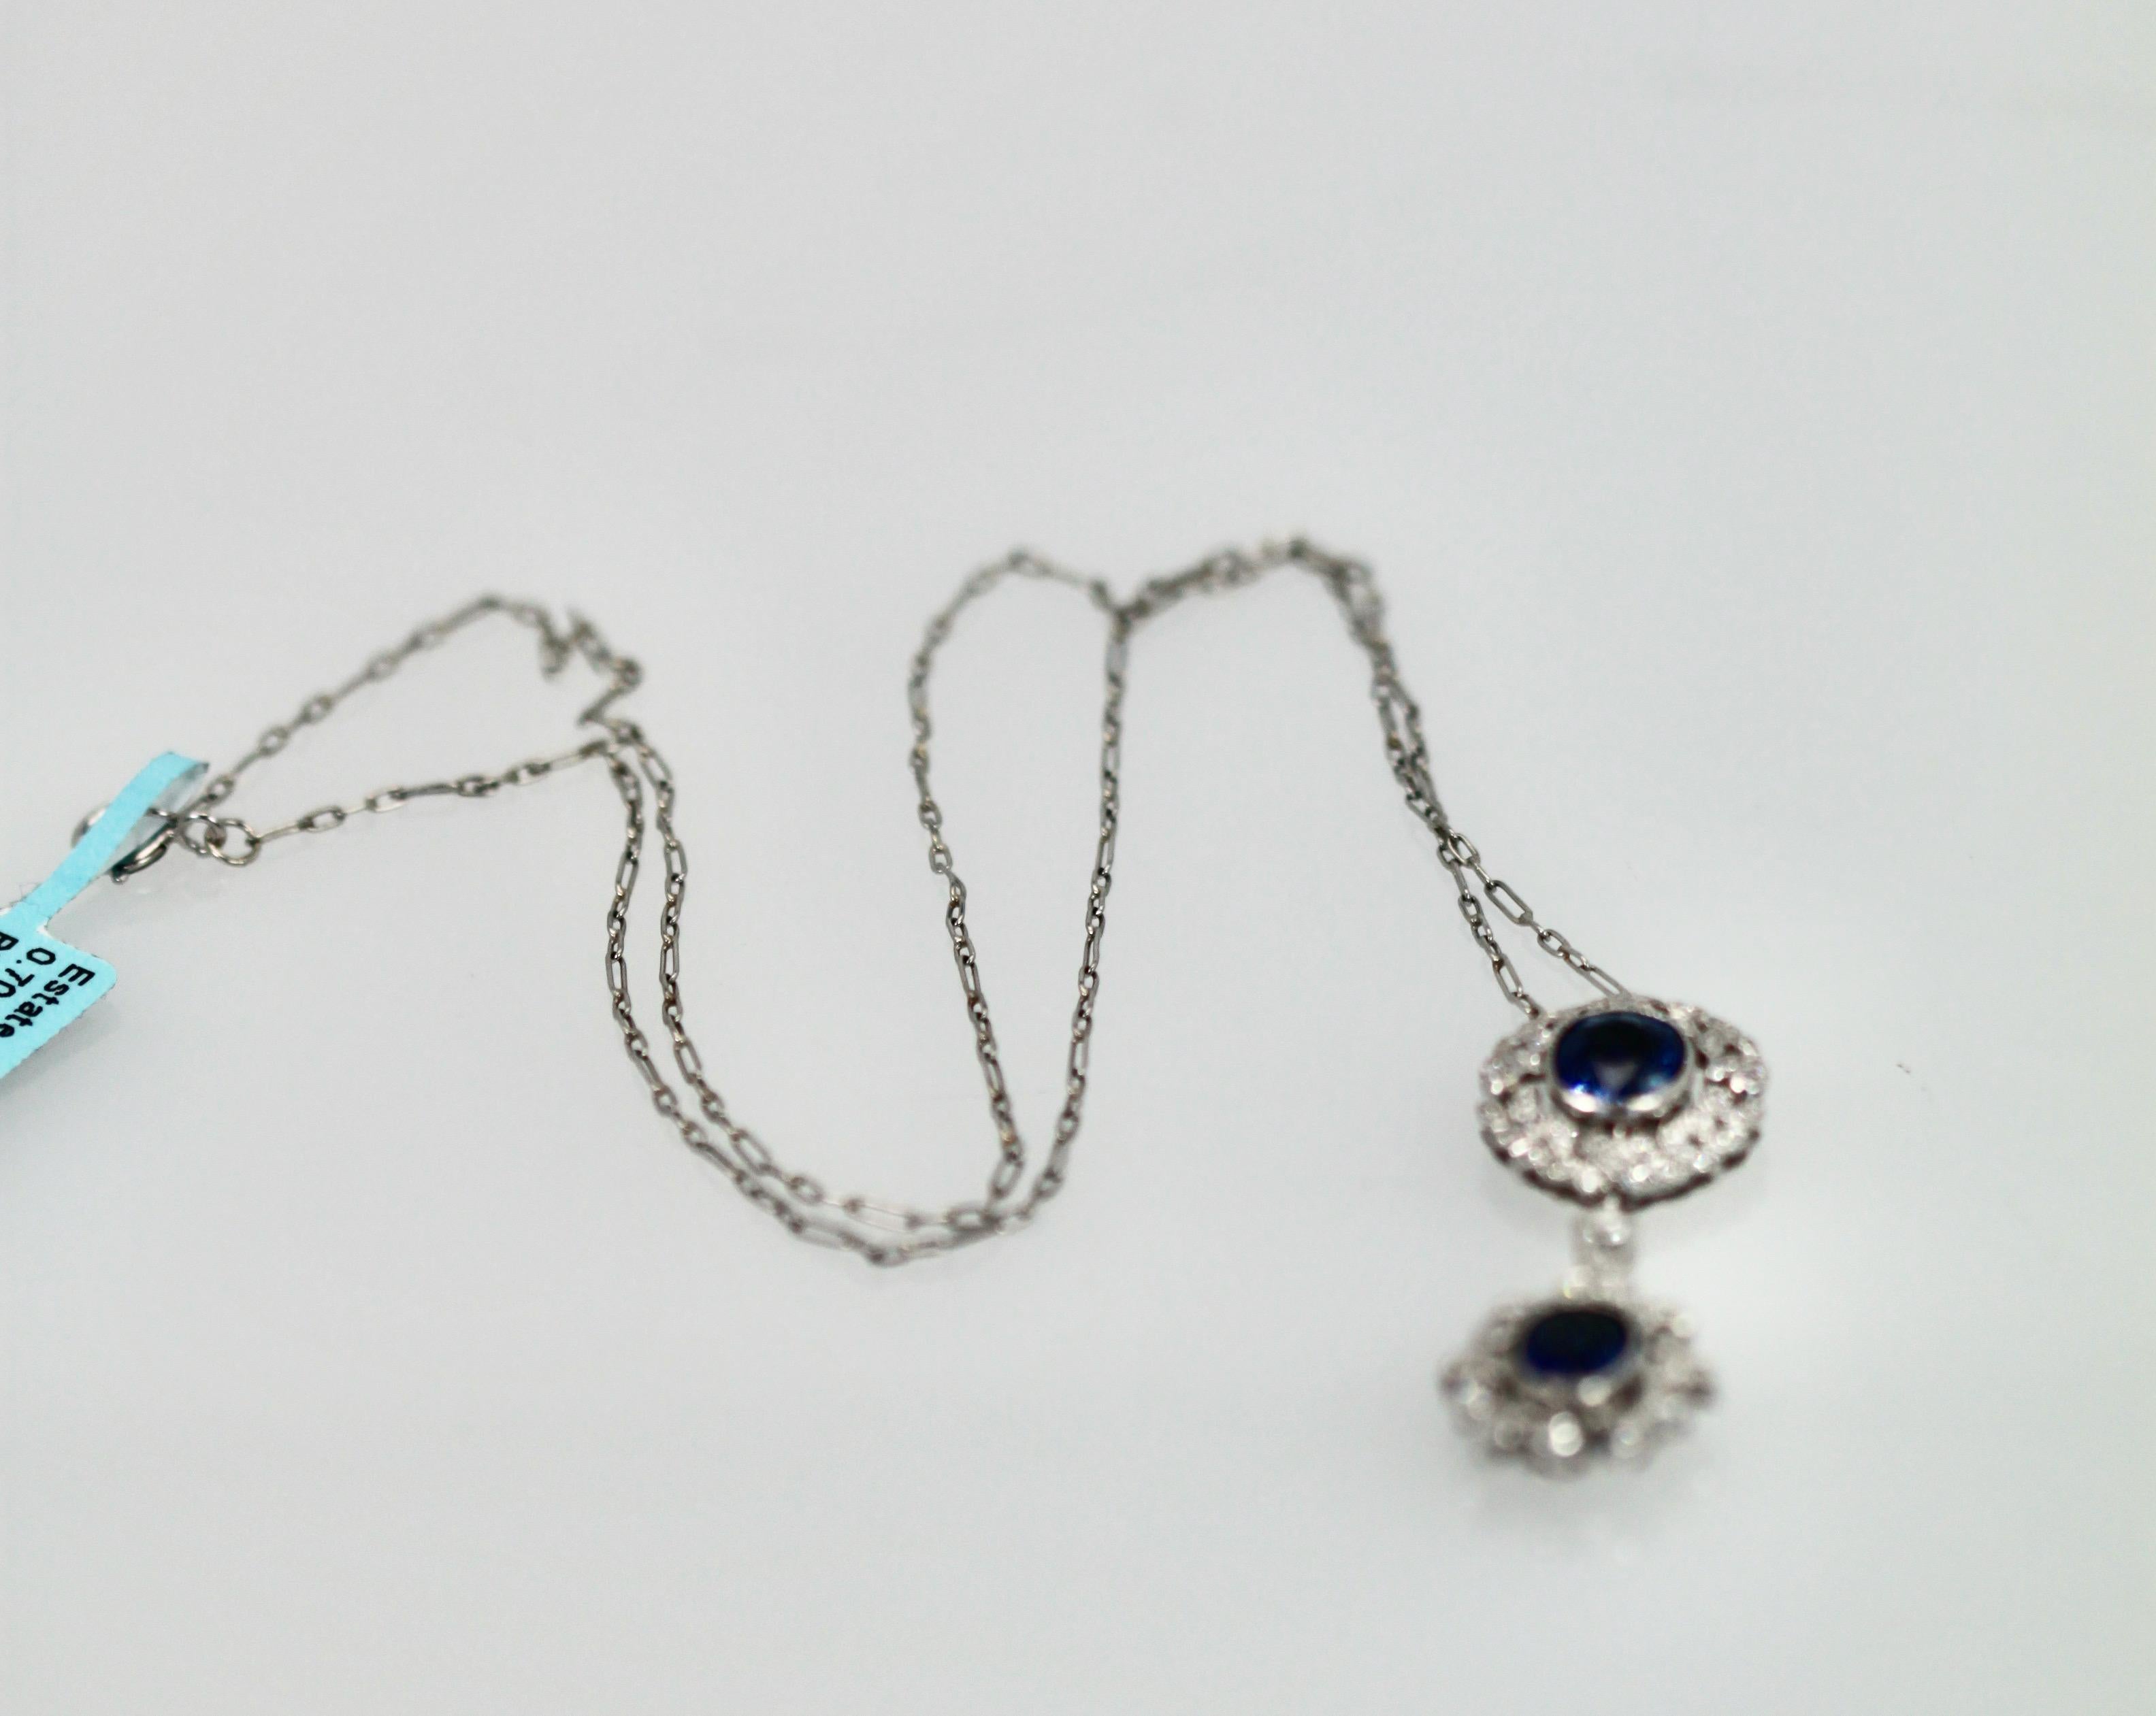 This necklace is made in 18K White Gold and features 2 beautiful Blue Sapphires. The style is modern yet bears a vintage drop necklace style. The necklace is 18